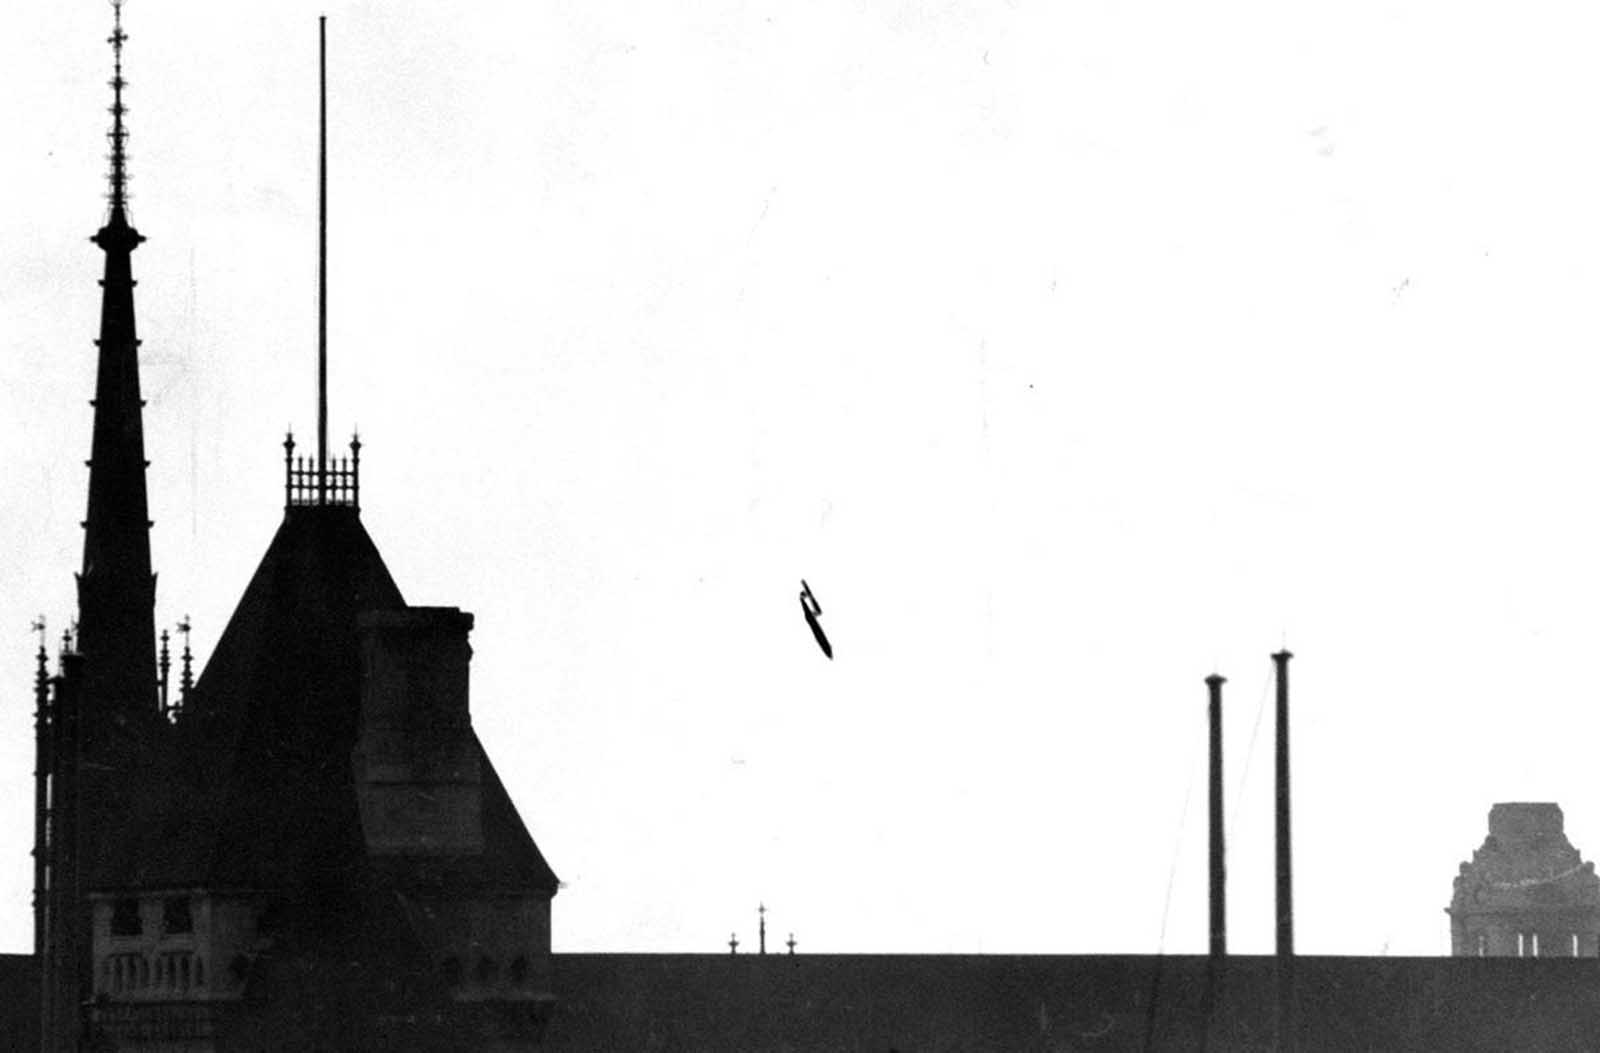 Across the Channel, Britain was being struck by continual bombardment by thousands of V-1 and V-2 bombs launched from German-controlled territory. This photo, taken from a fleet street roof-top, shows a V-1 flying bomb “buzzbomb” plunging toward central London. The distinctive sky-line of London’s law-courts clearly locates the scene of the incident. Falling on a side road off Drury Lane, this bomb blasted several buildings, including the office of the Daily Herald. The last enemy action of British soil was a V-1 attack that struck Datchworth in Hertfordshire, on March 29 1945.